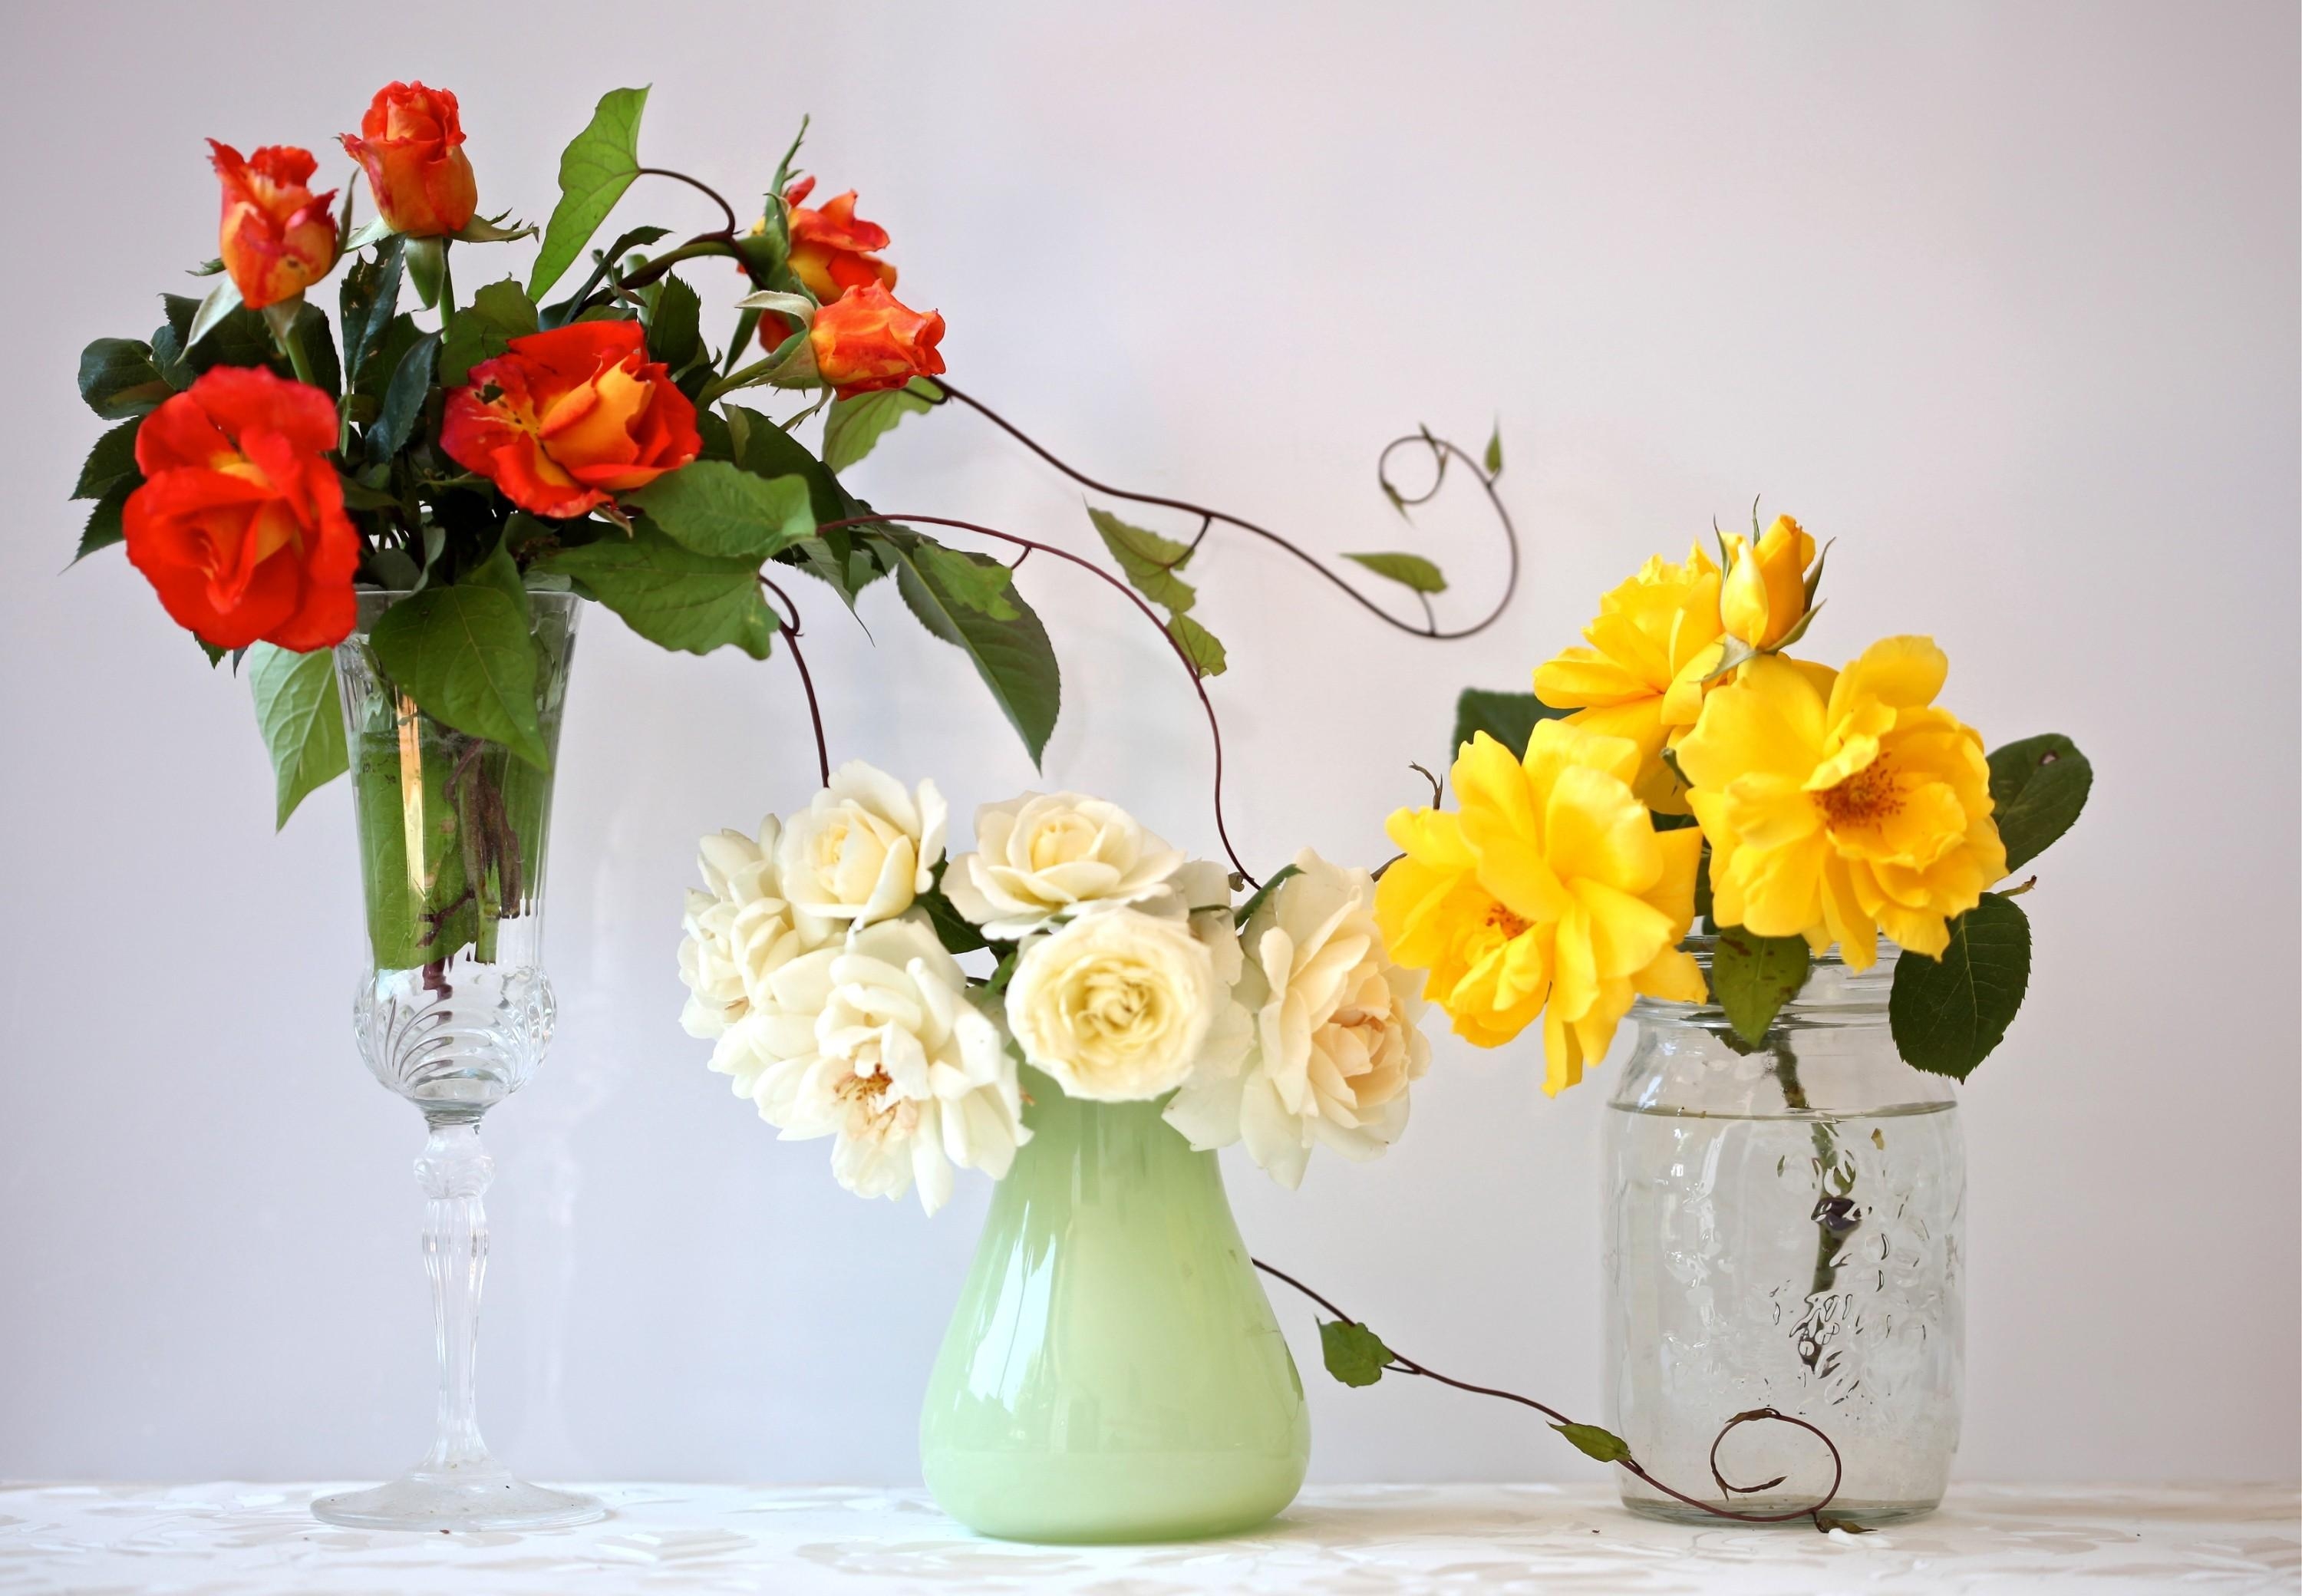 bouquets, flowers, roses, three, fougere, tall wine glass, different, vases Full HD